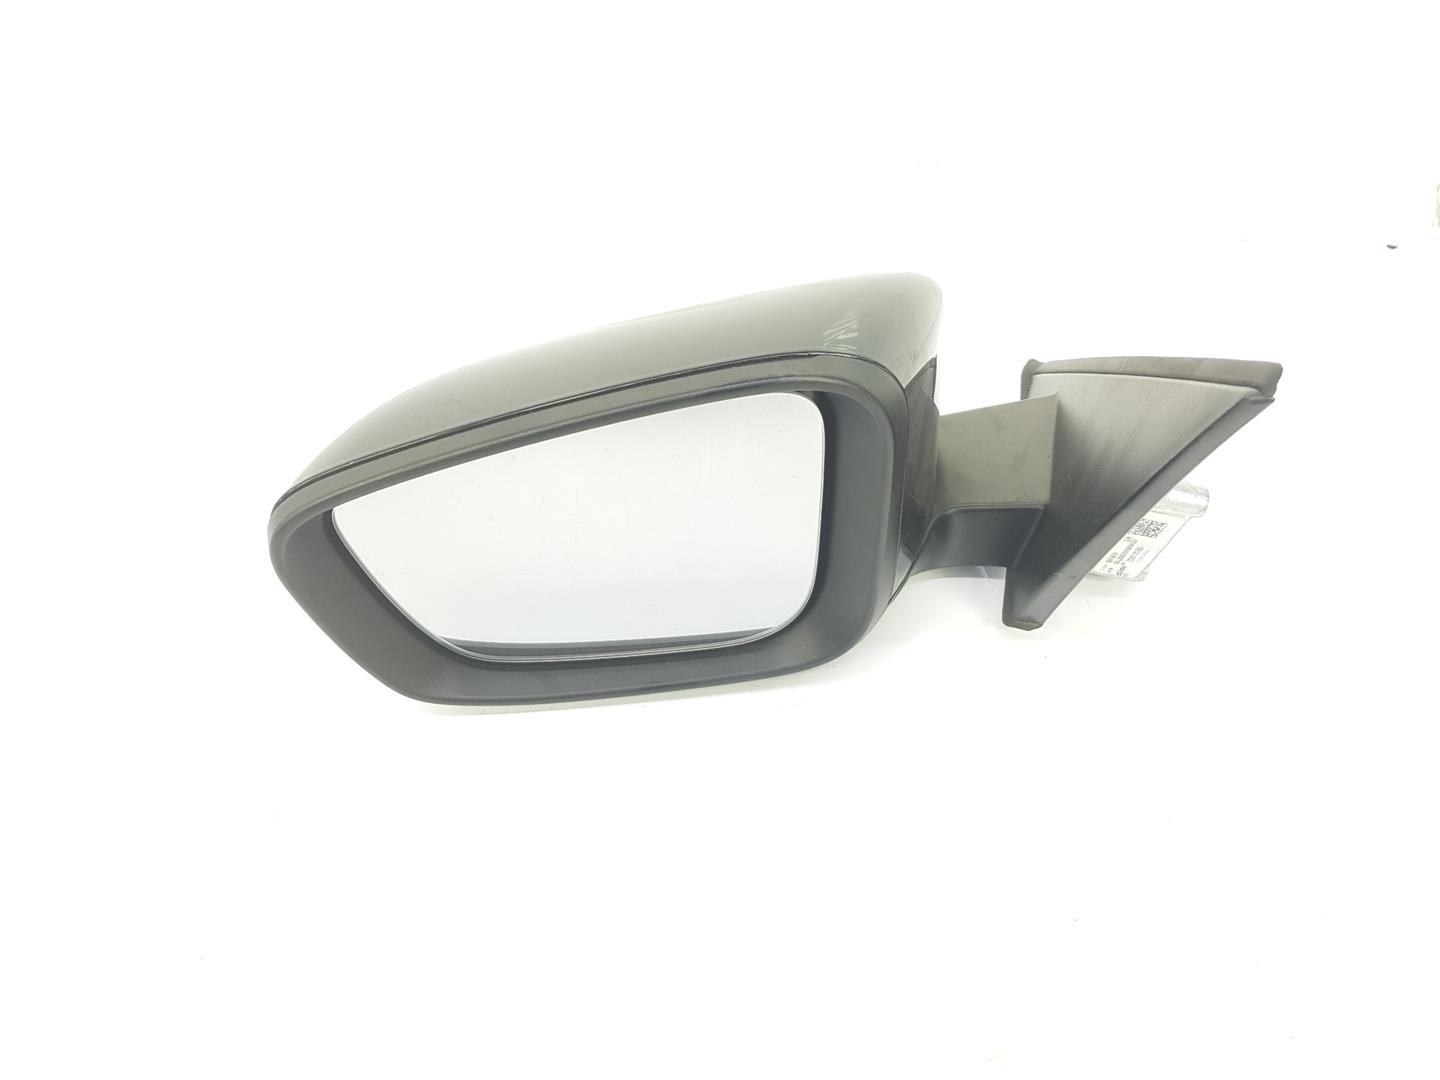 BMW 3 Series G20/G21/G28 (2018-2024) Left Side Wing Mirror 51168498191, 51168498191, COLORNEGRO475 24136236